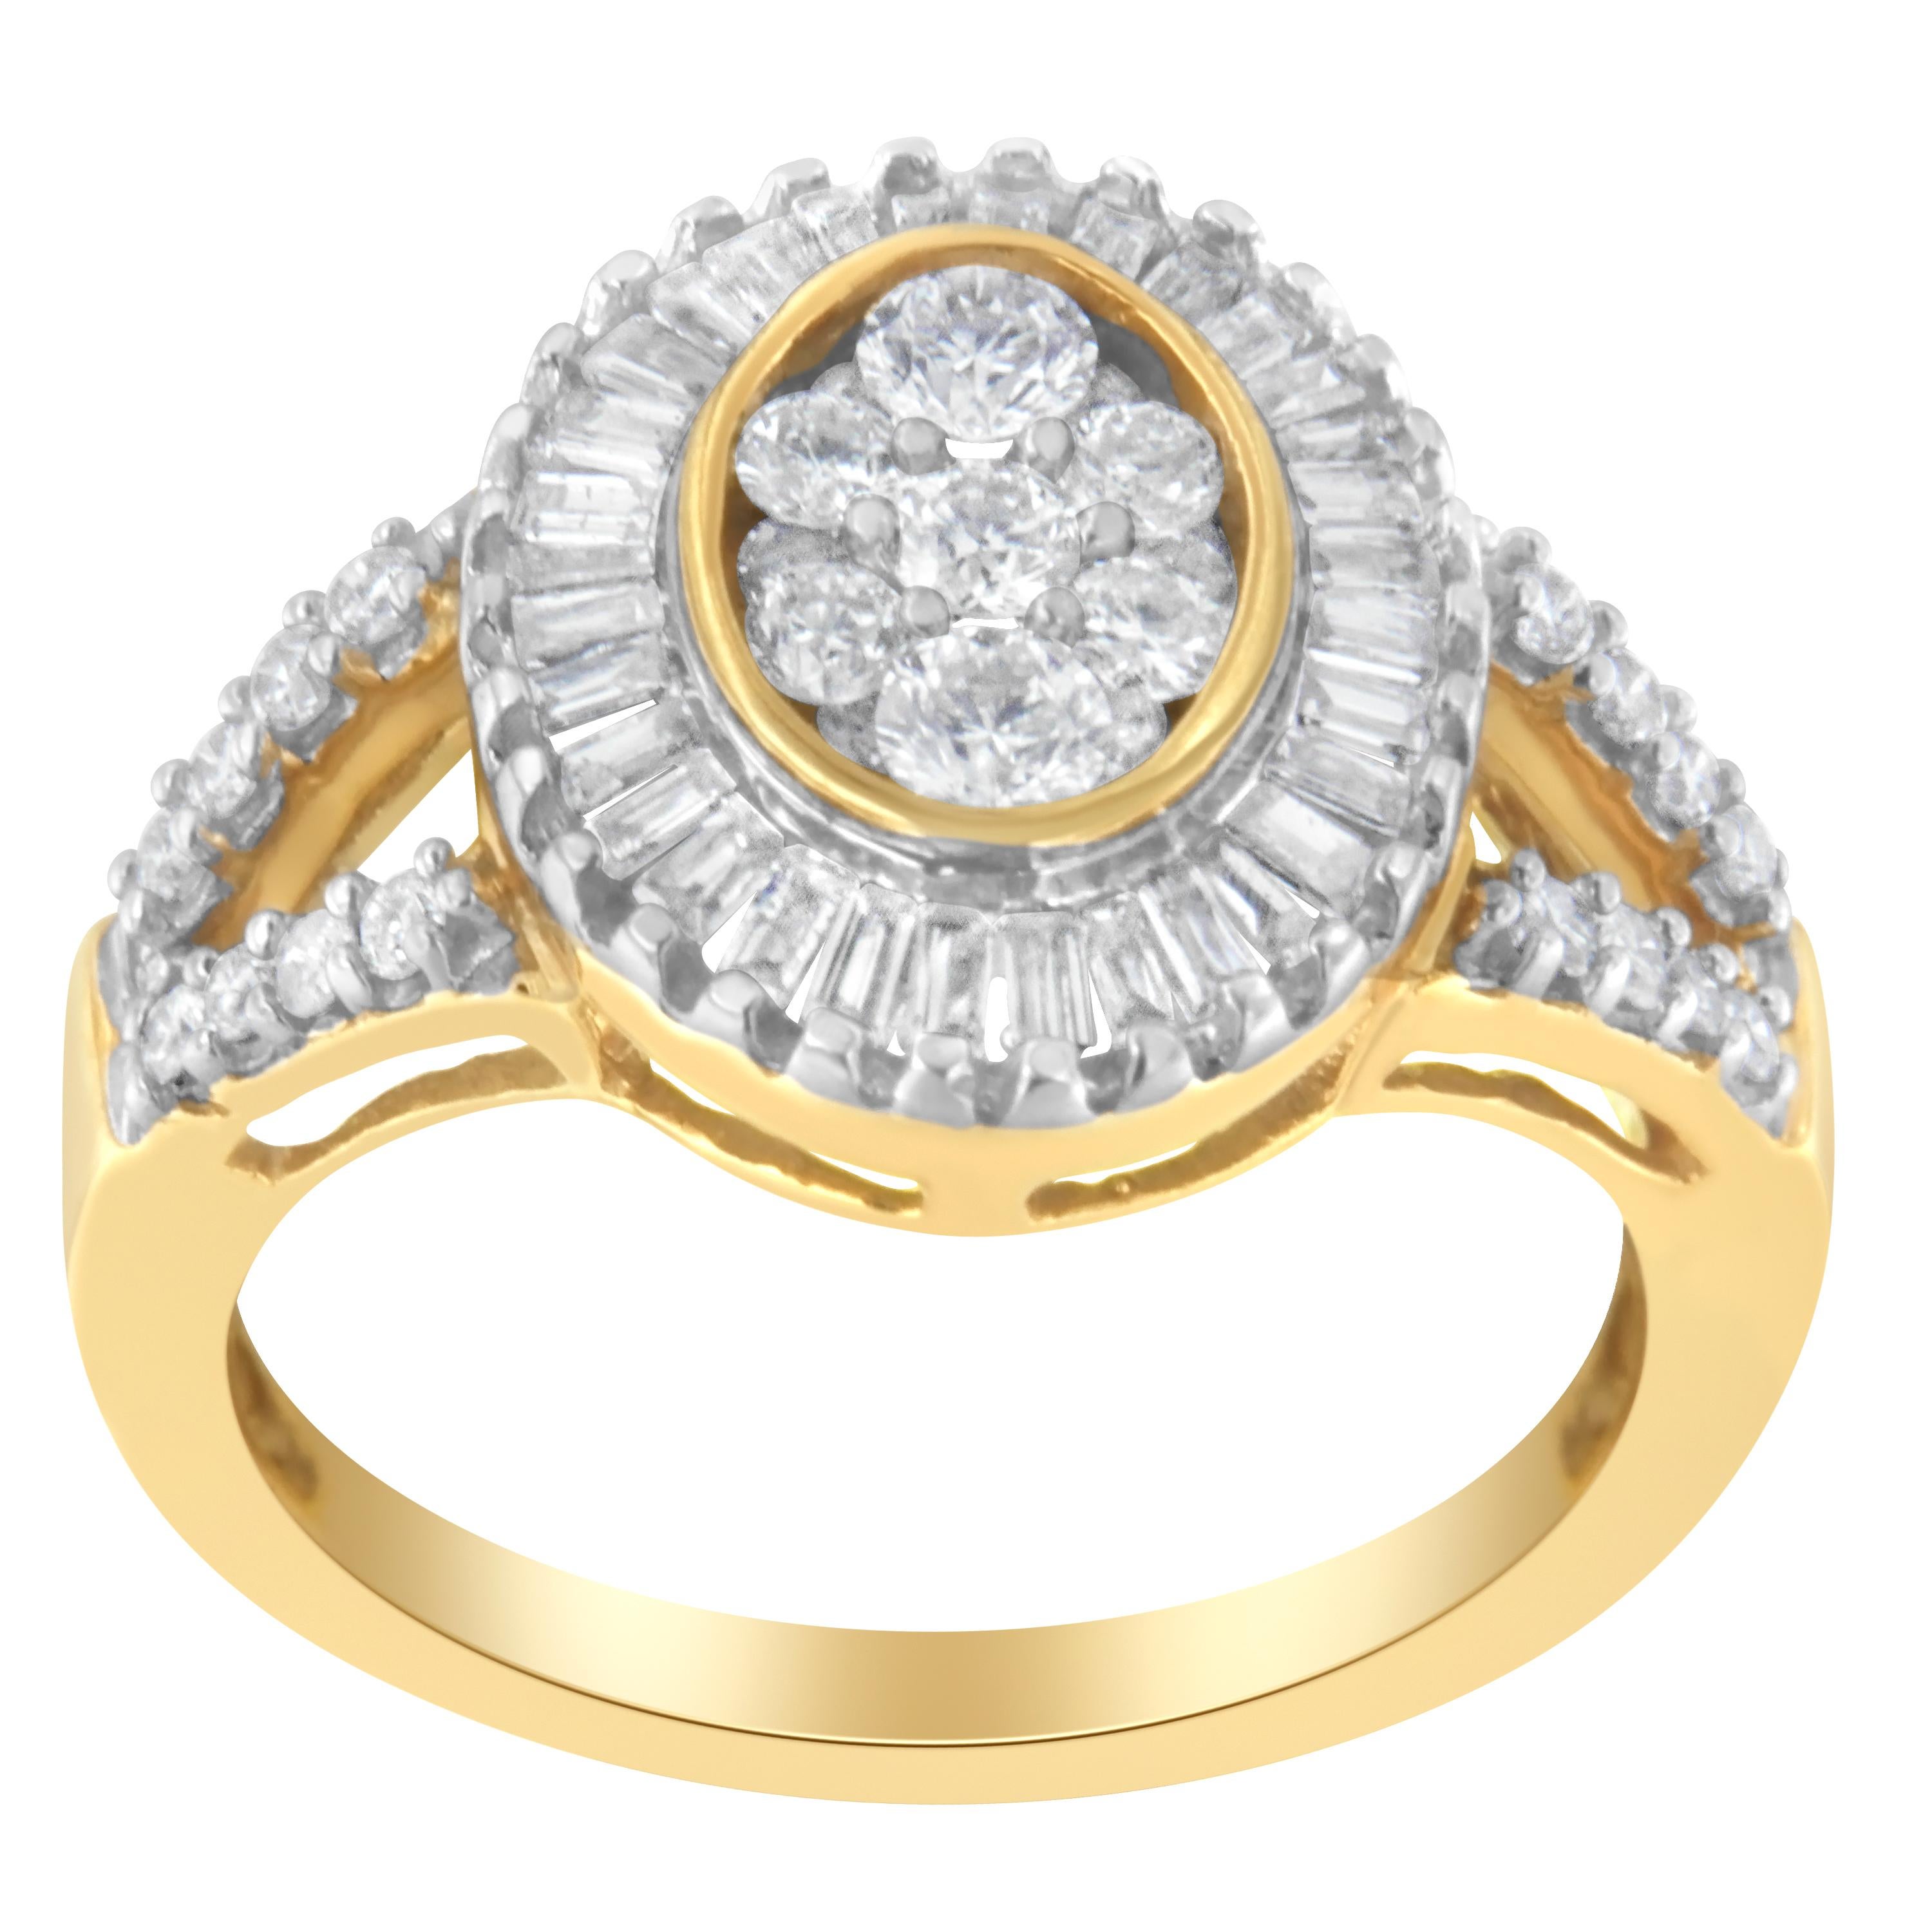 This glamorous diamond cocktail ring features a central oval cluster of round diamonds surrounded by a halo of baguette diamonds. The sparkling split shank band is set with diamonds. Crafted in 10 karat yellow gold, the total diamond weight is 1